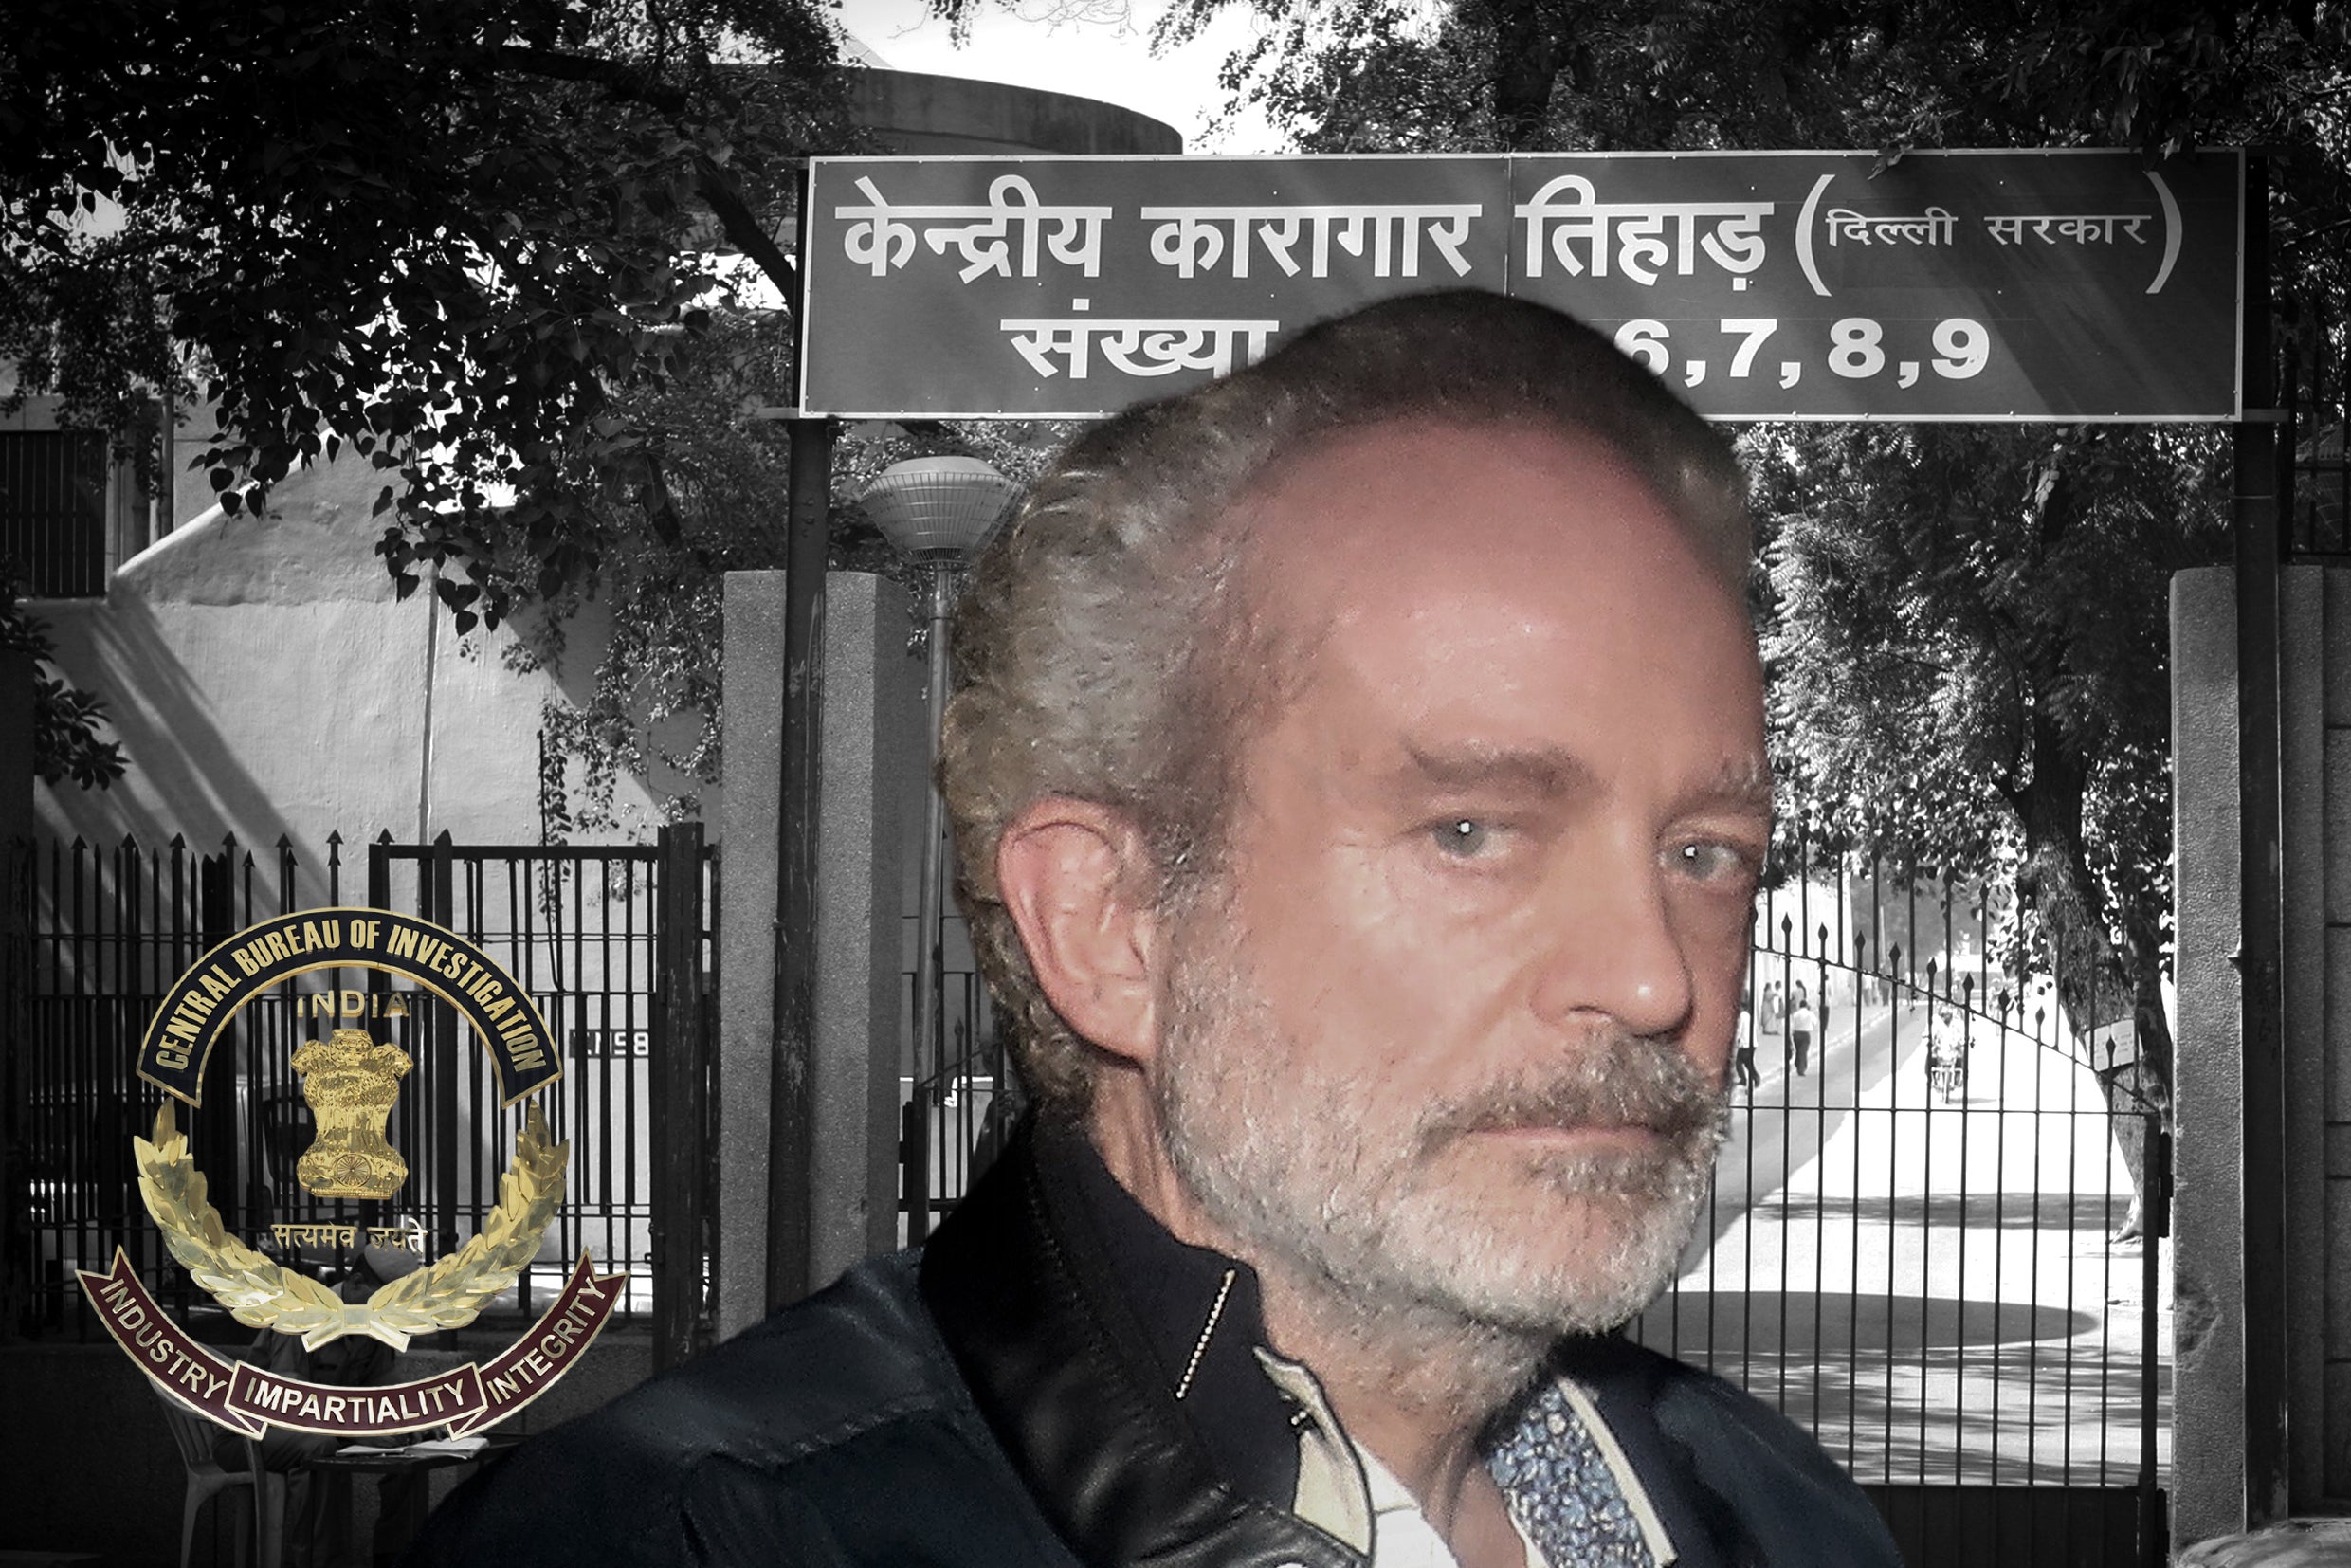 Christian Michel, a key accused and alleged middleman in the helicopter deal with Anglo-Italian firm AgustaWestland, has been held in a Delhi jail since 2018